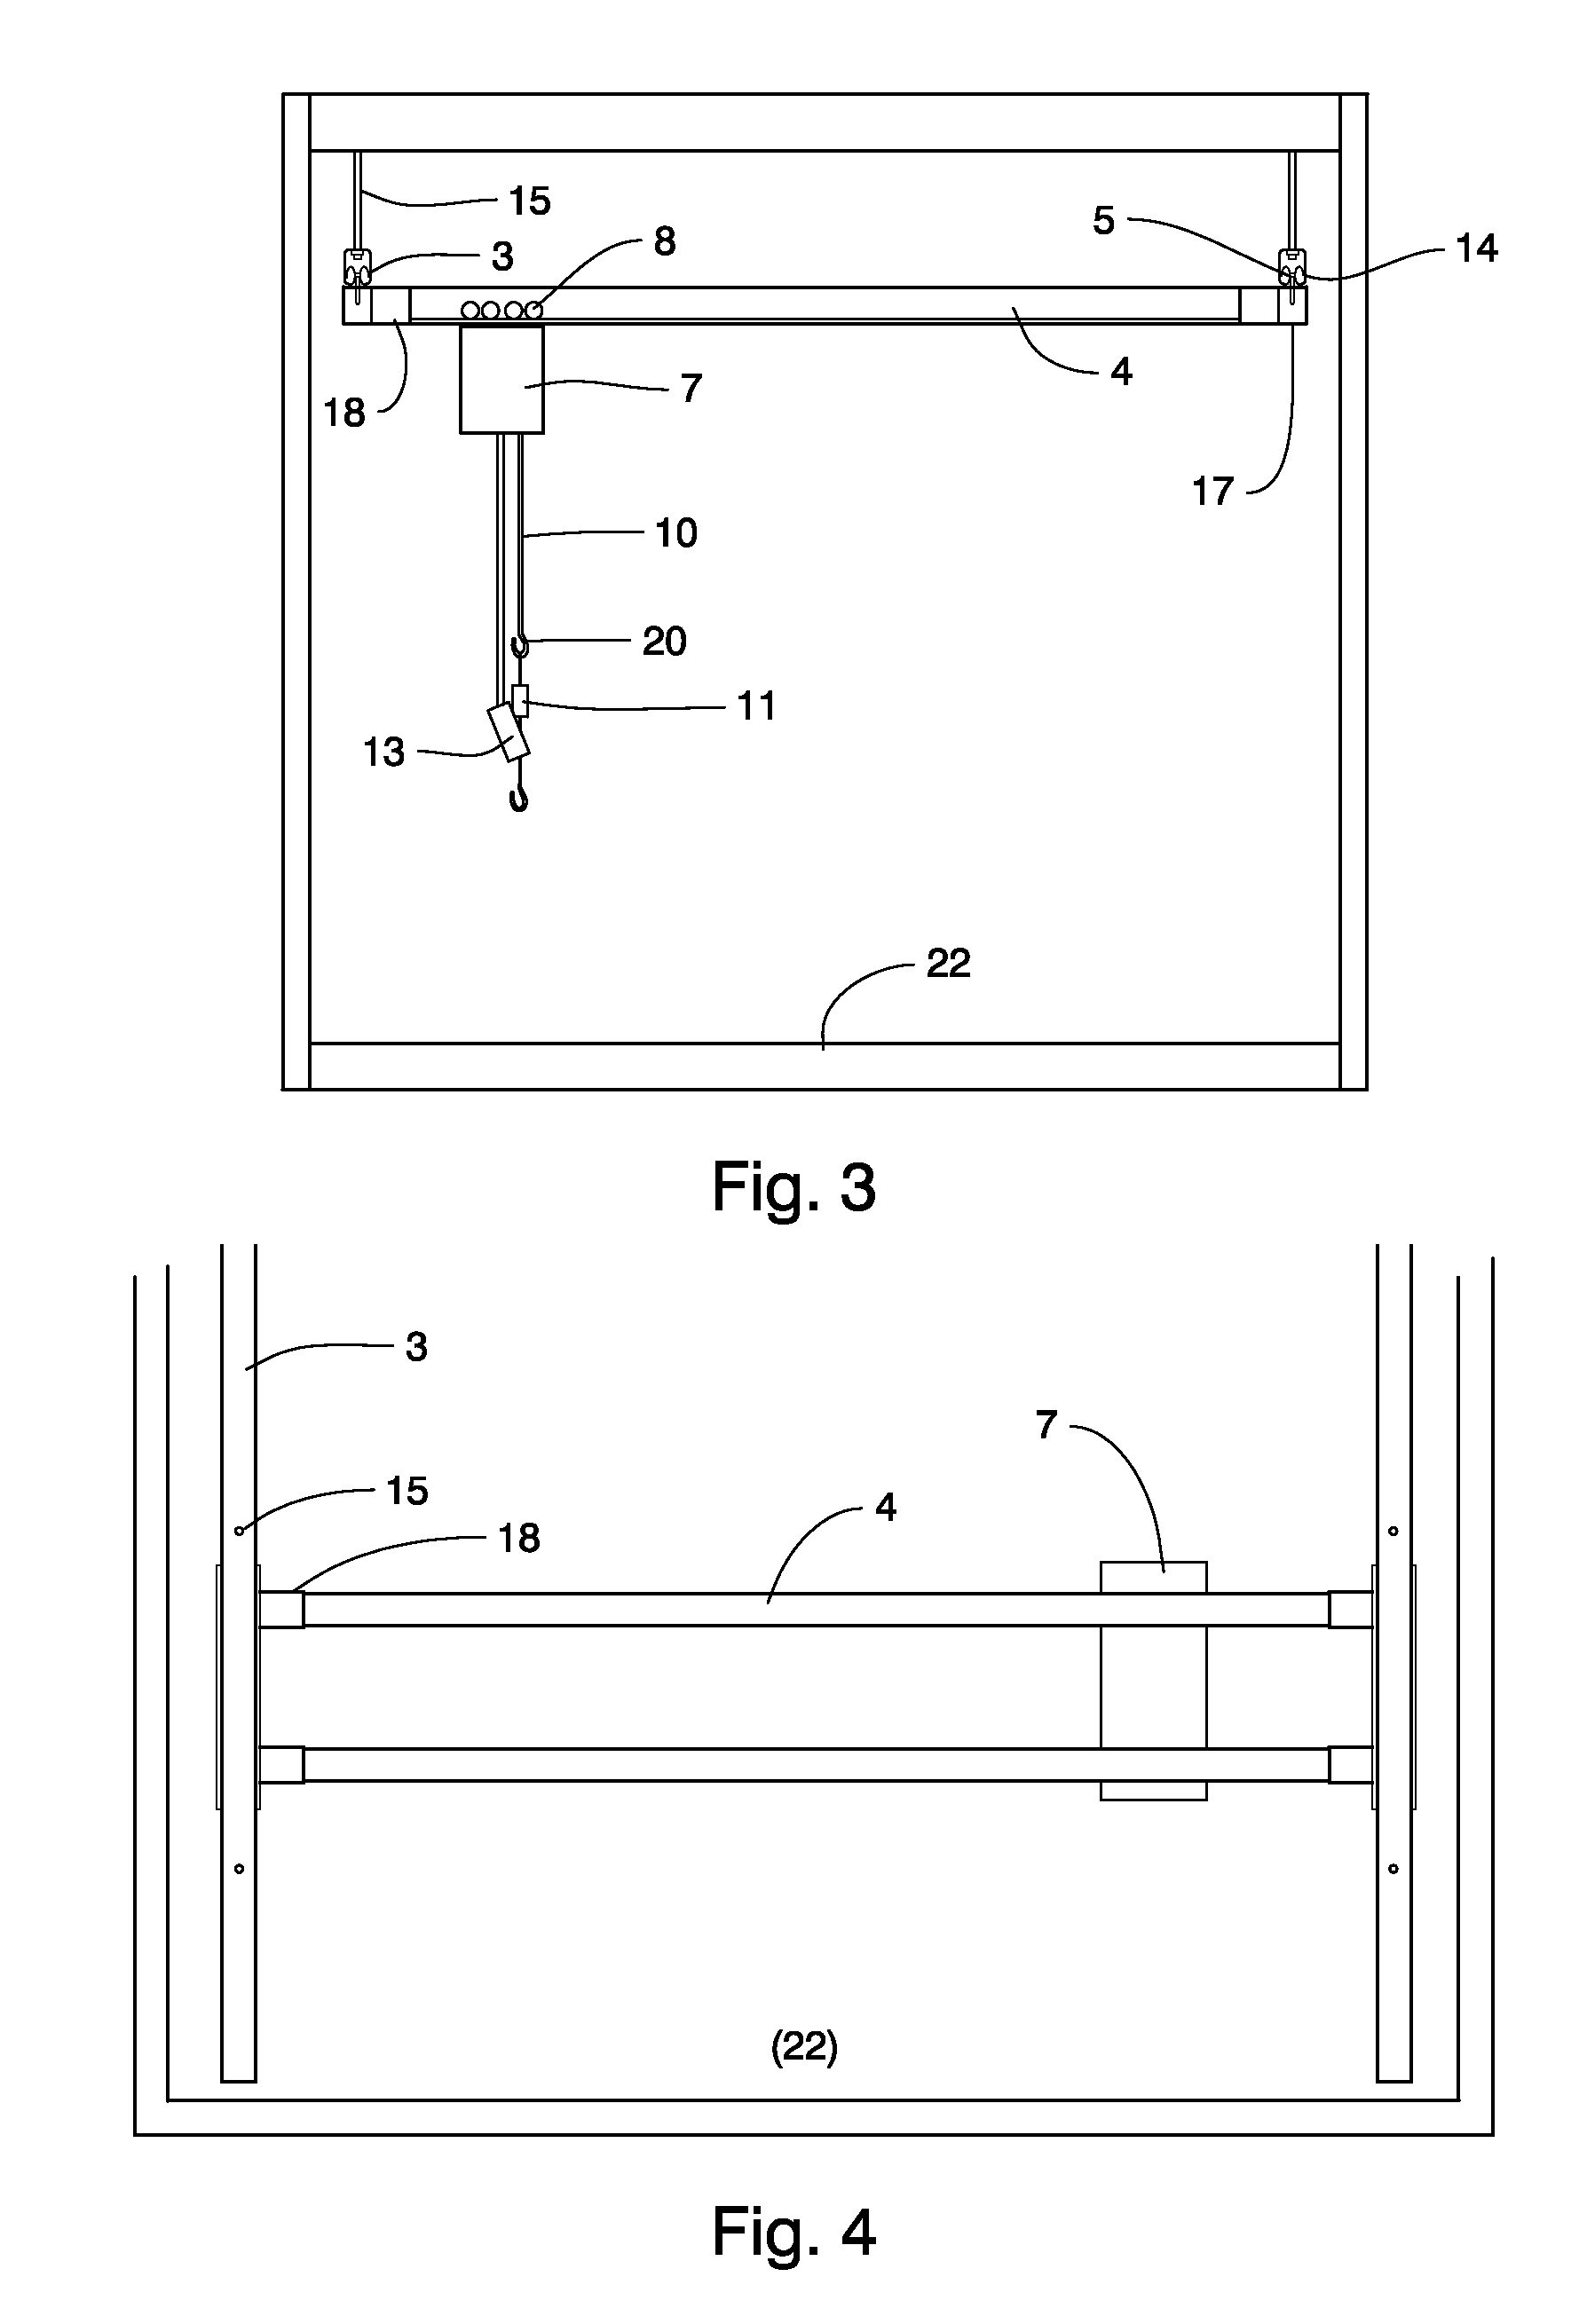 Controlled-suspension standing device for medical and veterinary use